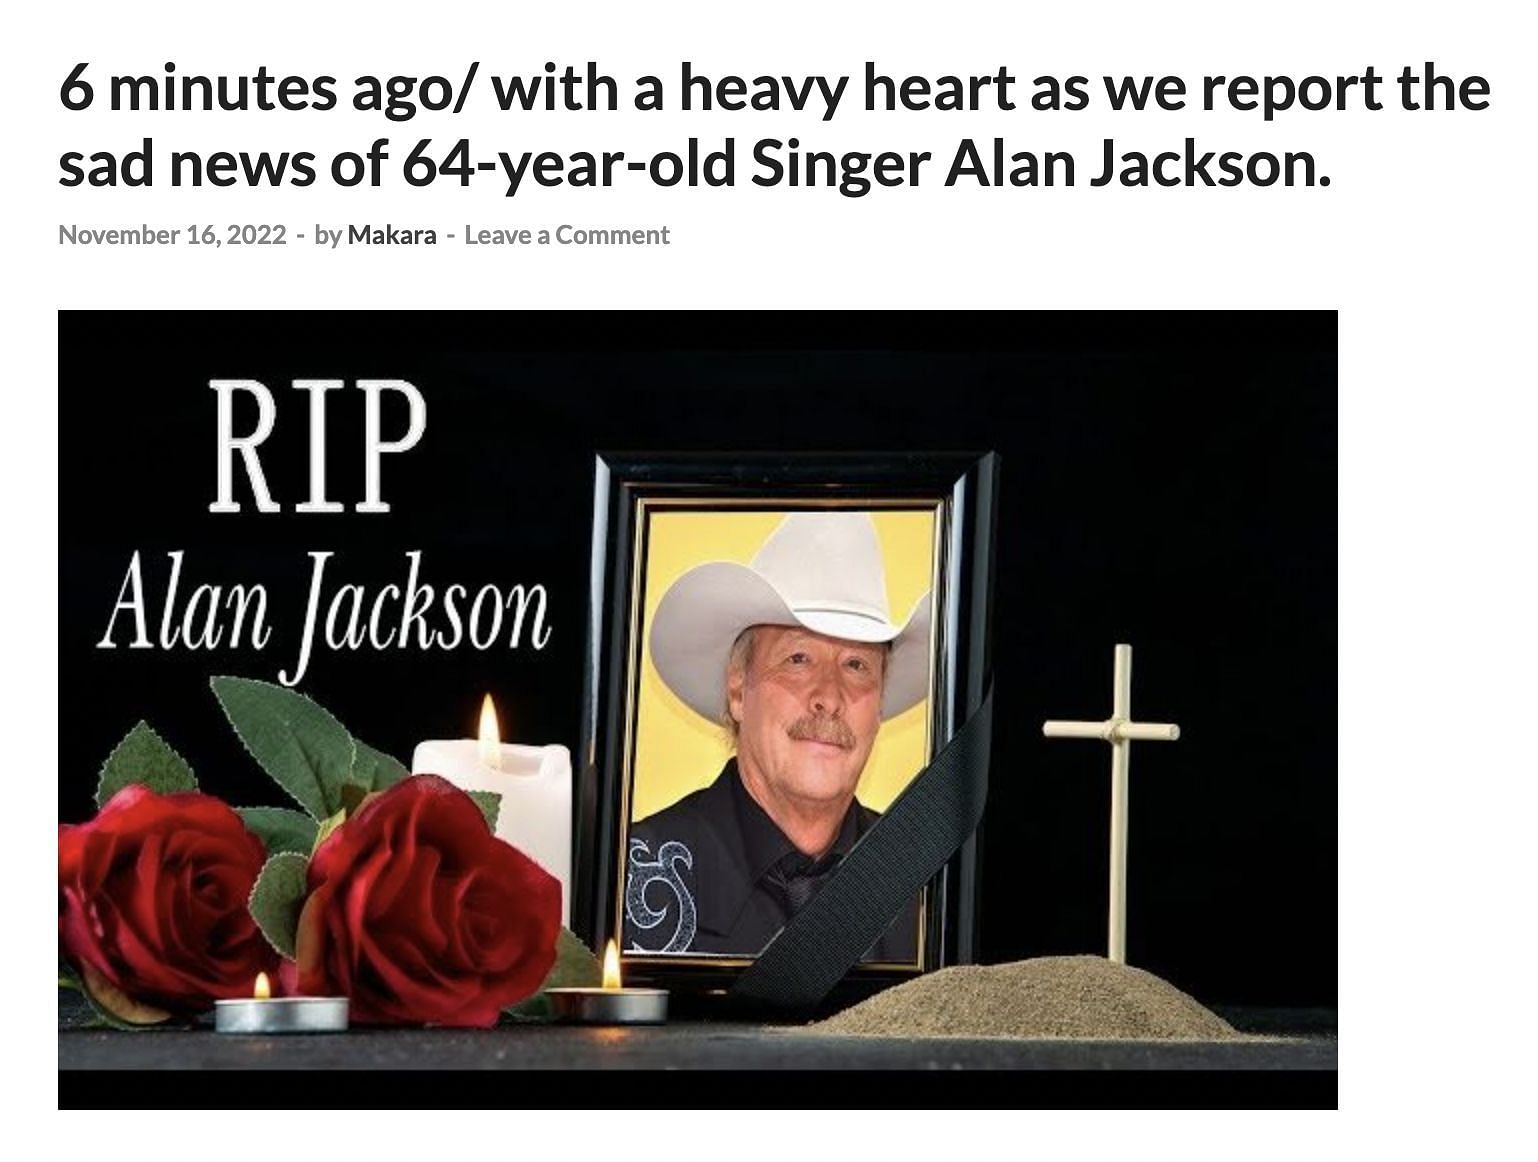 A website showed the news of Alan Jackson being dead. (Image via FNEWS2)